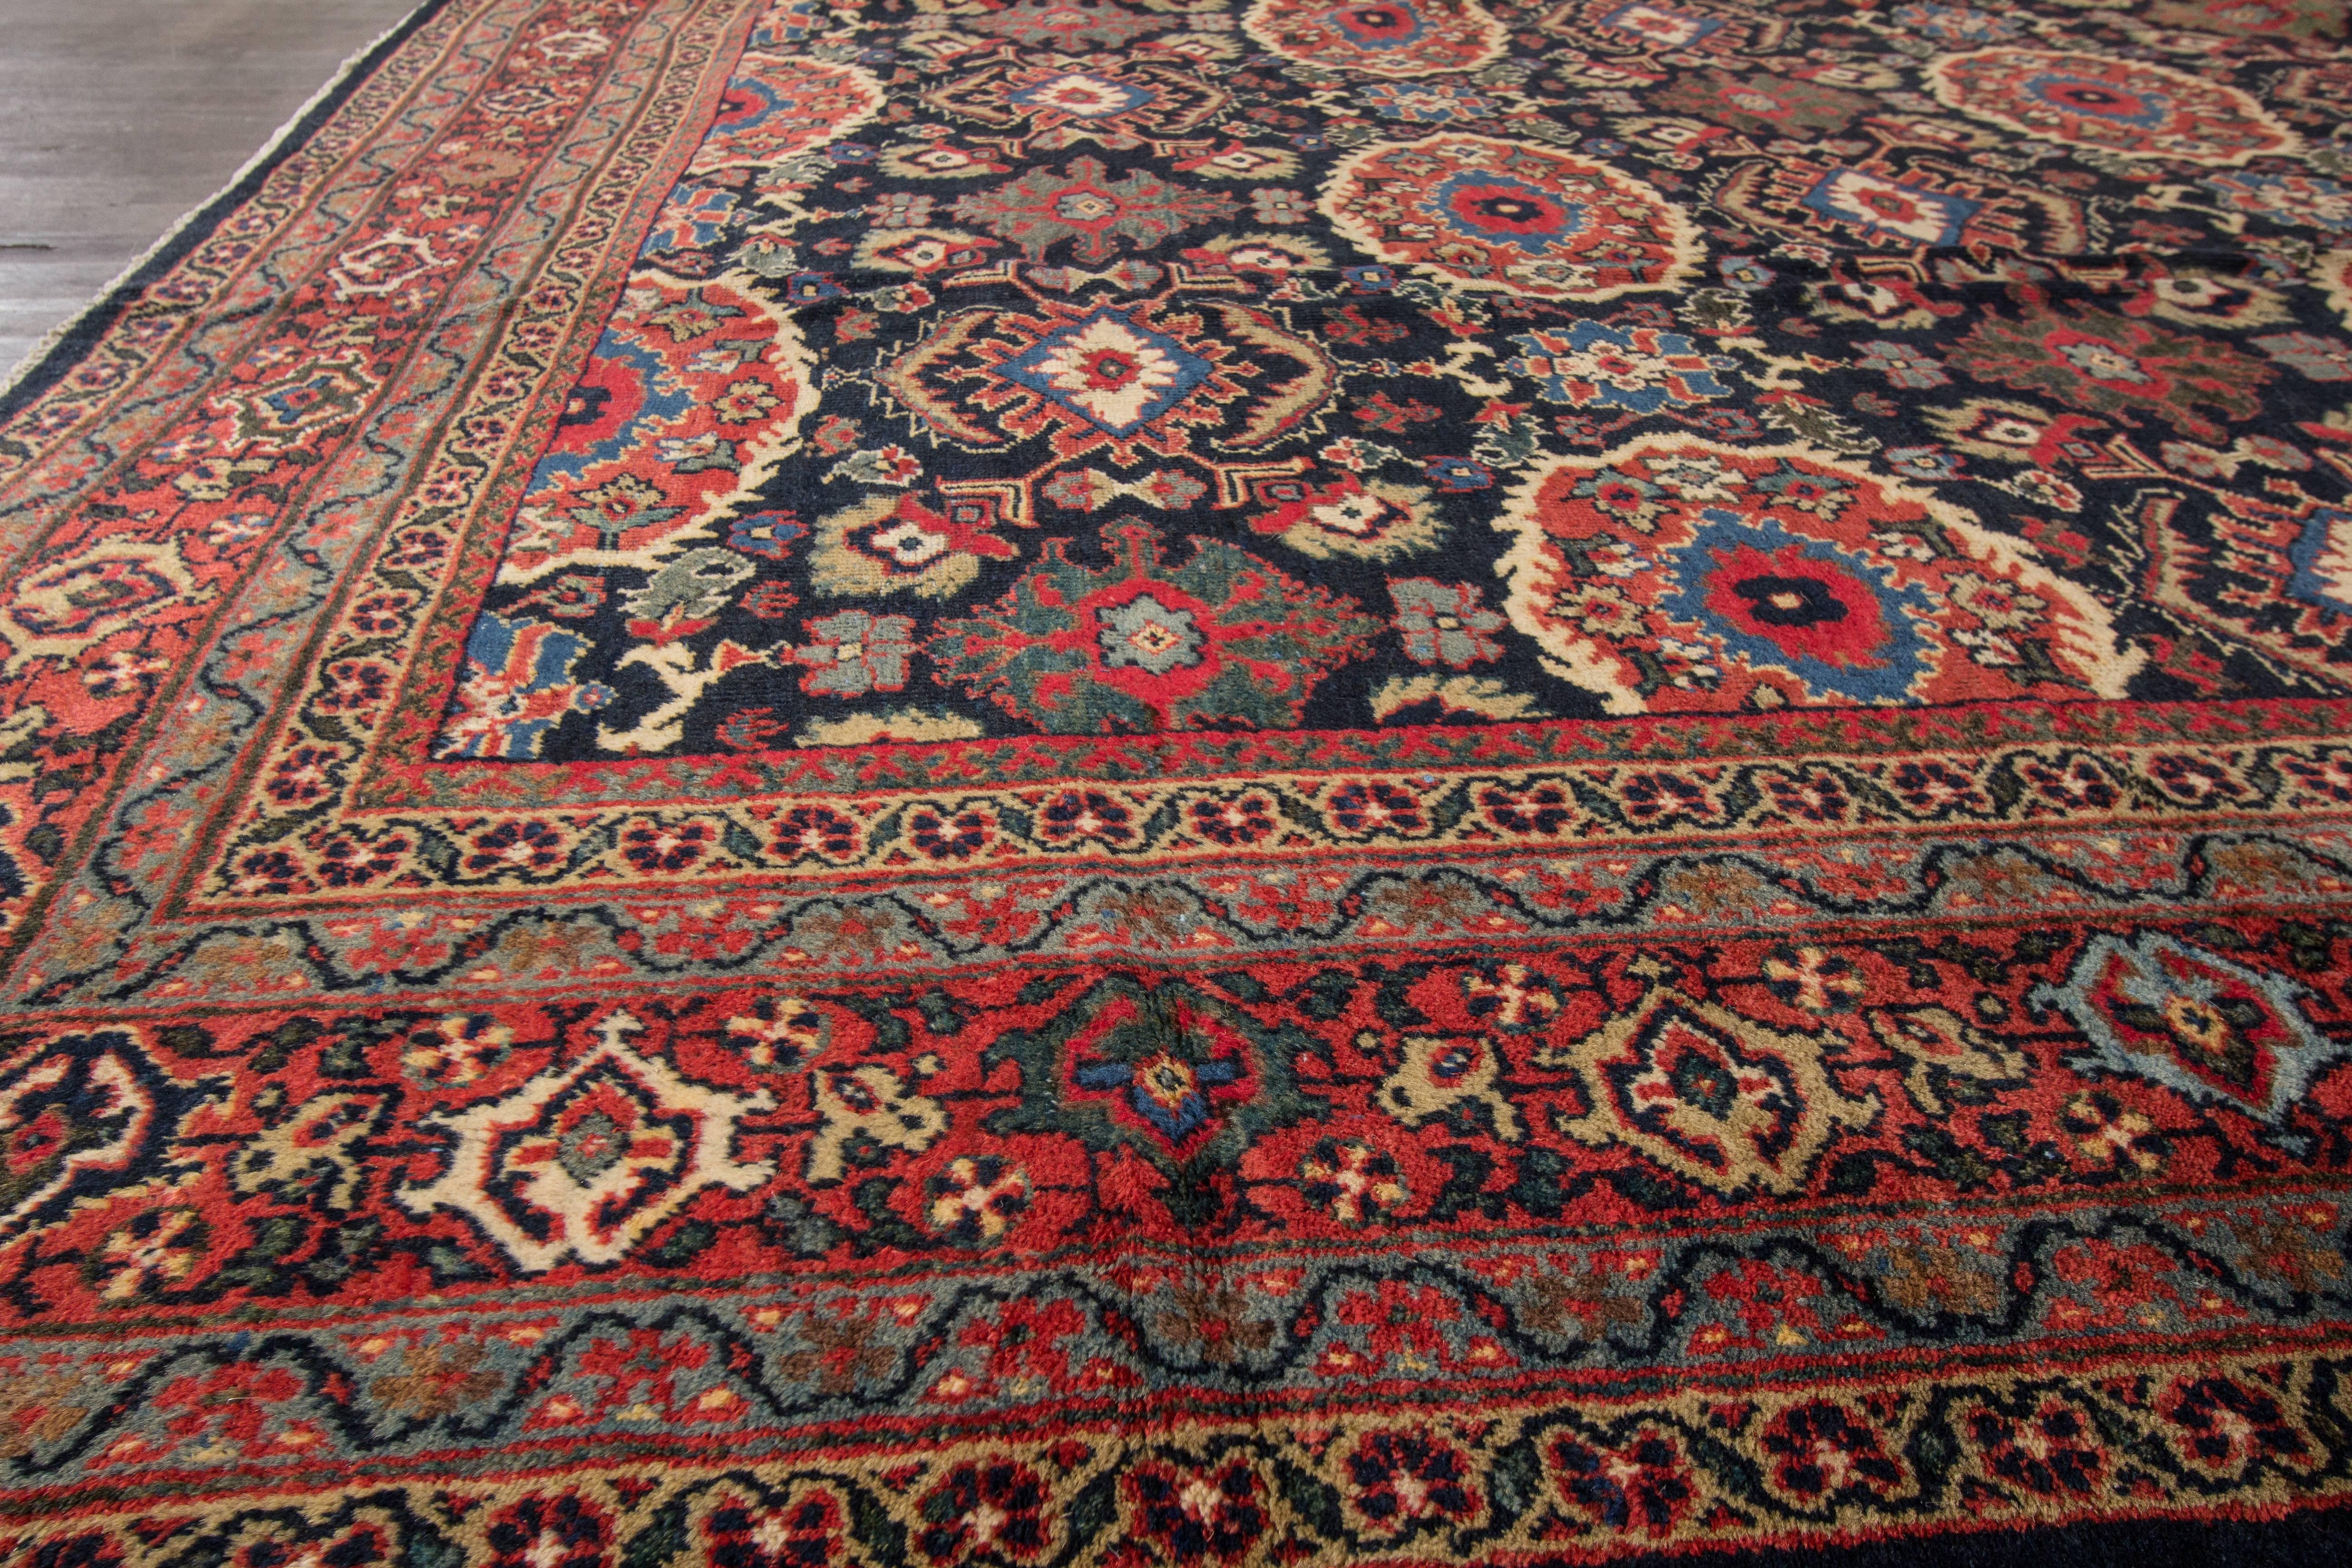 Measures: 11' x 17'.9
Antique Sultanabad carpets from the 19th century and turn of the 20th century have become perhaps the most desirable among Persian village weavings, as they appeal strongly to both connoisseurs and interior designers. These